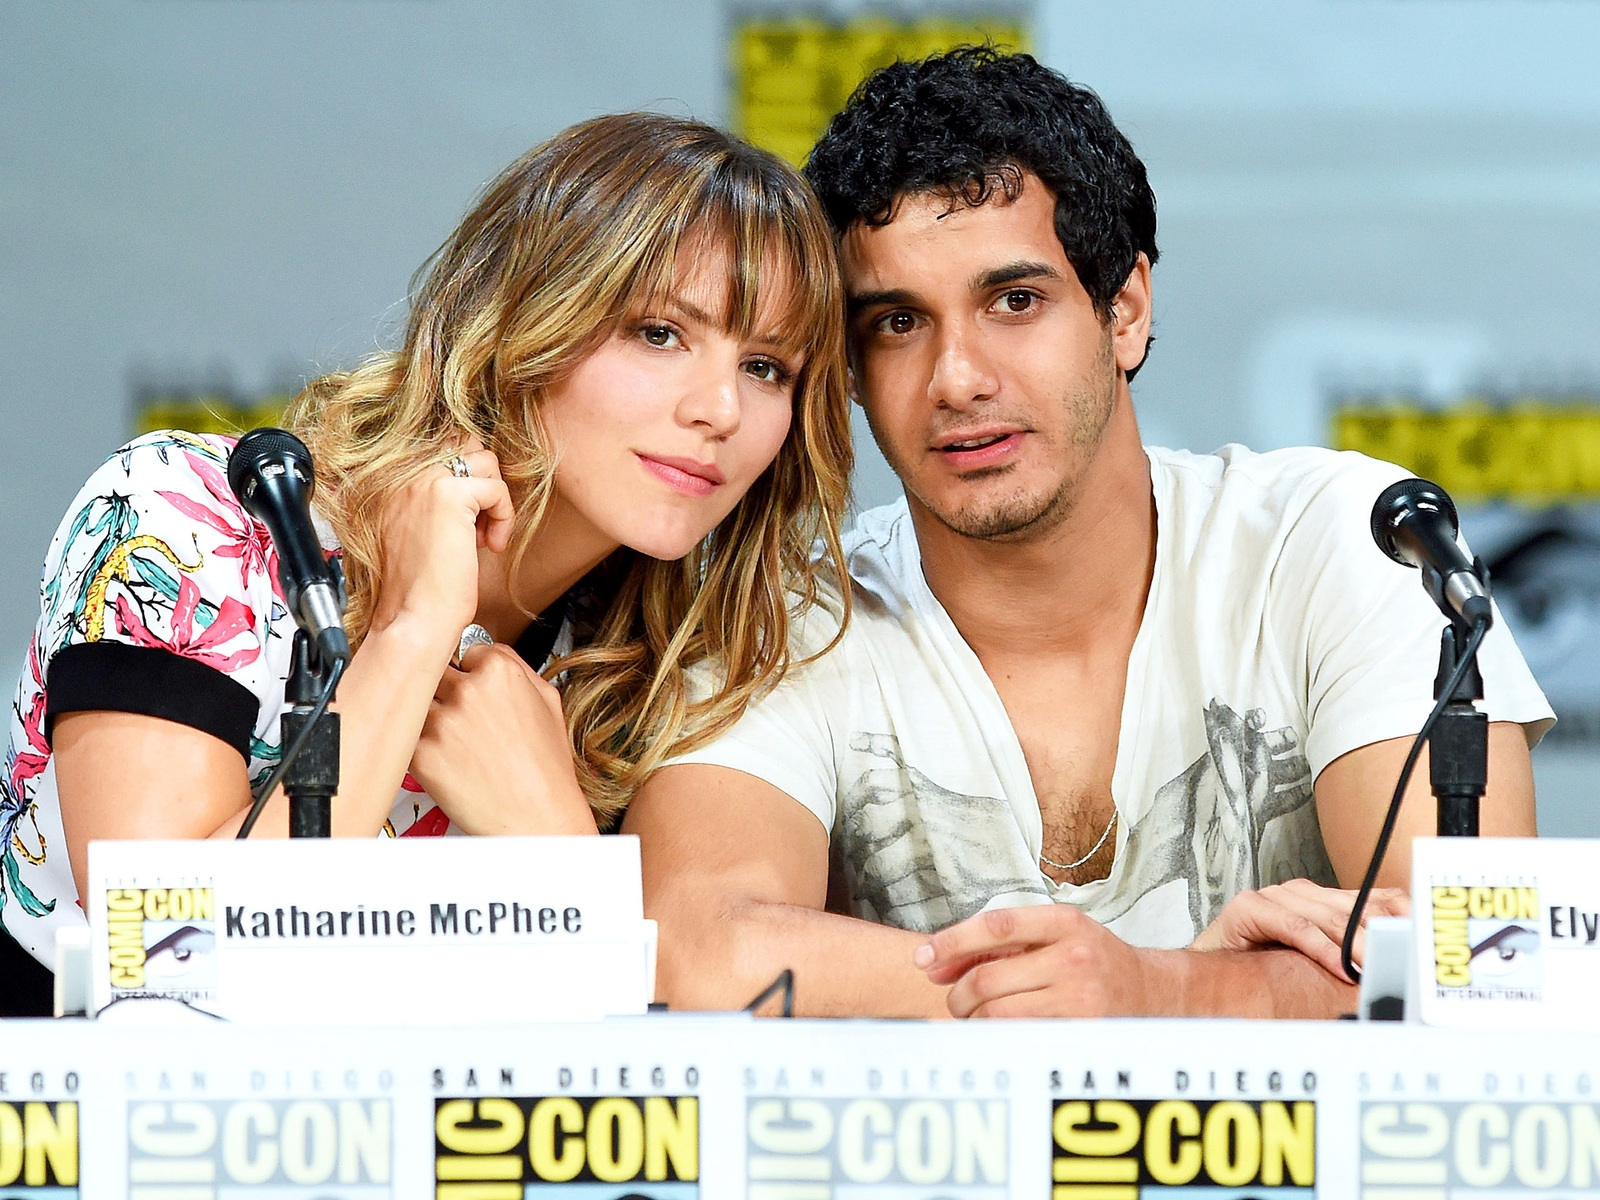 Katharine McPhee and Elyes Gabel for 1600 x 1200 resolution